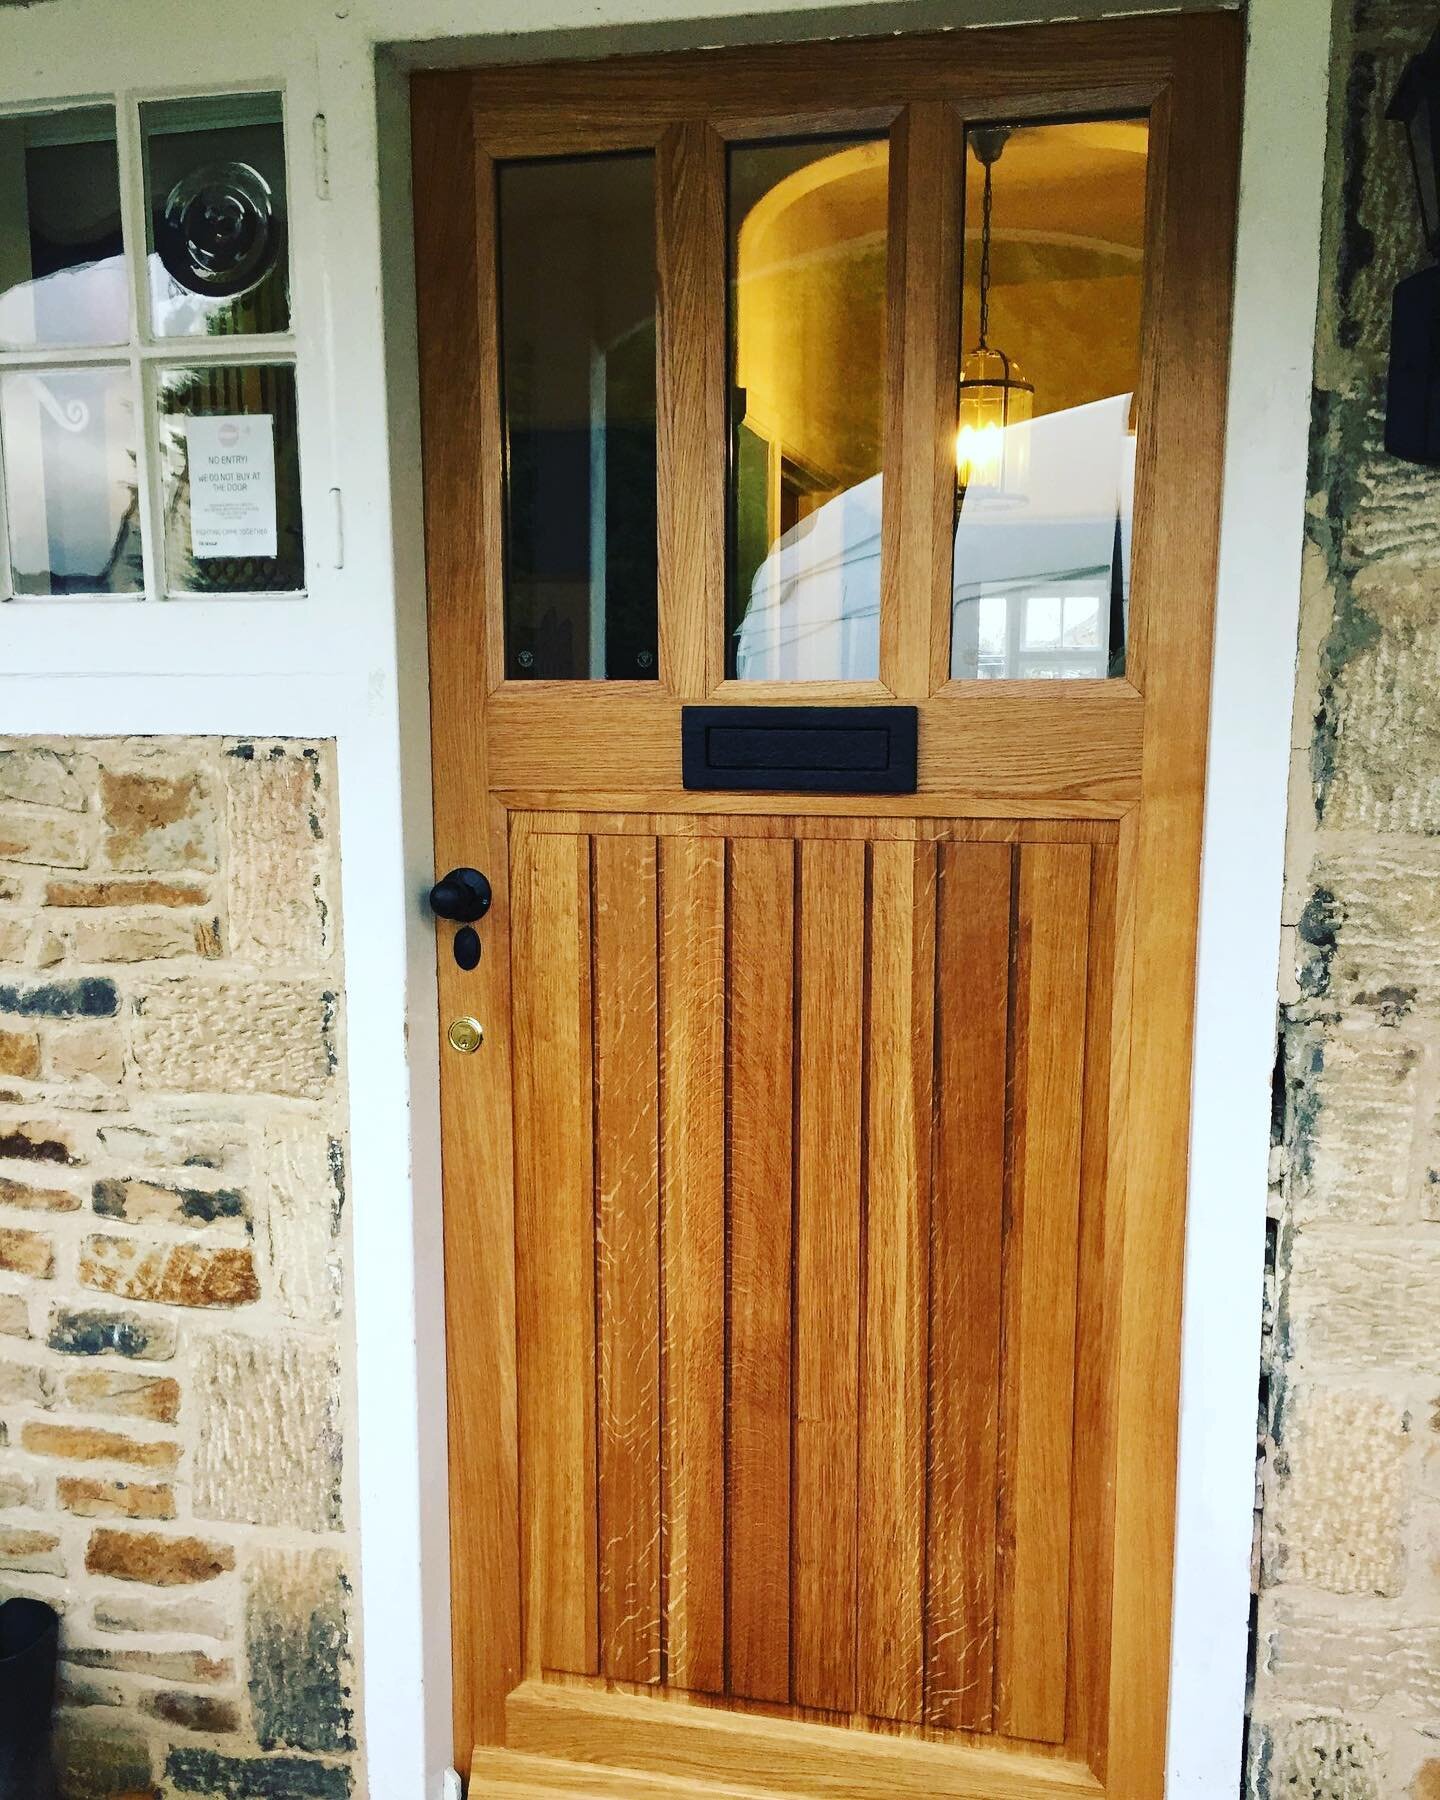 Take a look at this beautiful door we recently manufactured for a very happy customer! 👍
The customer contacted A-Rock after seeing a door he loved on our Willows development and wanted us to supply for his house. Unfortunately, the door manufacture